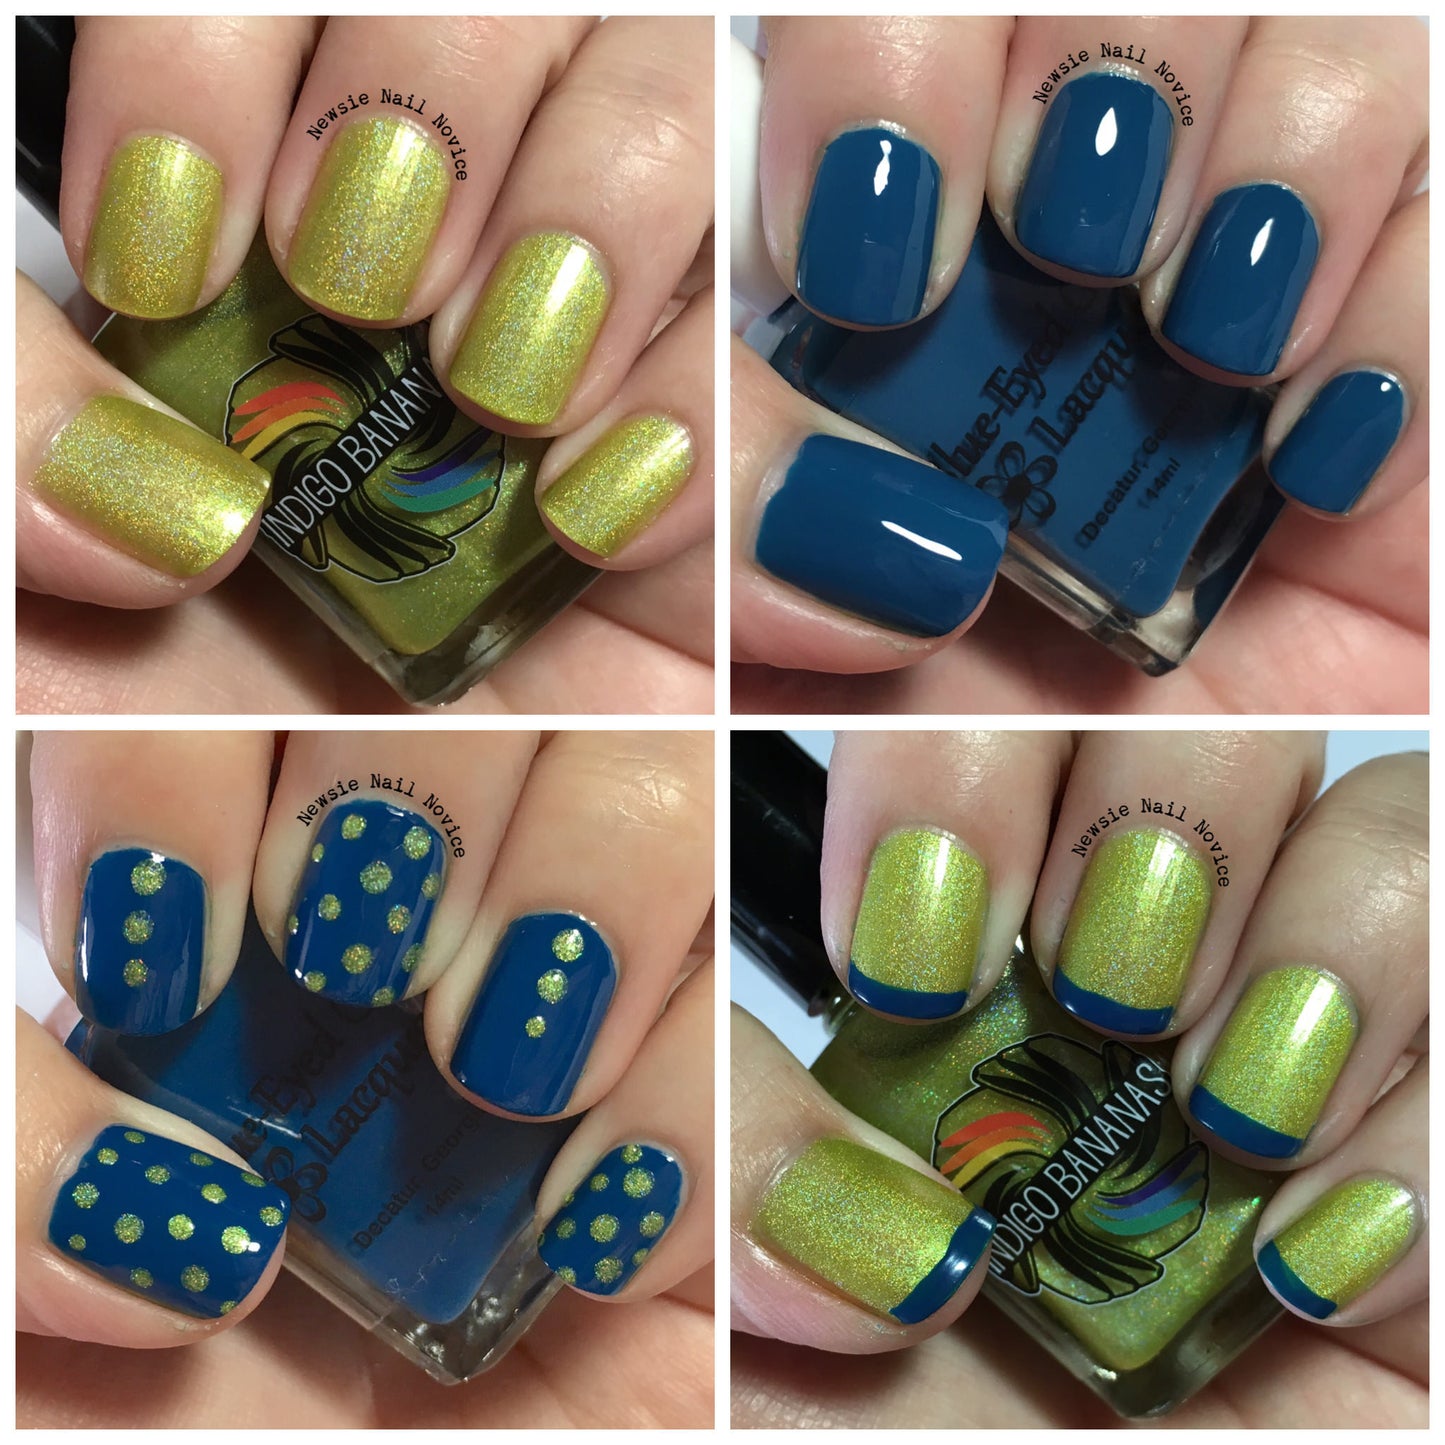 Lighthouse Dec 2015 Destination duo - with Blue Eyed Girl Lacquer